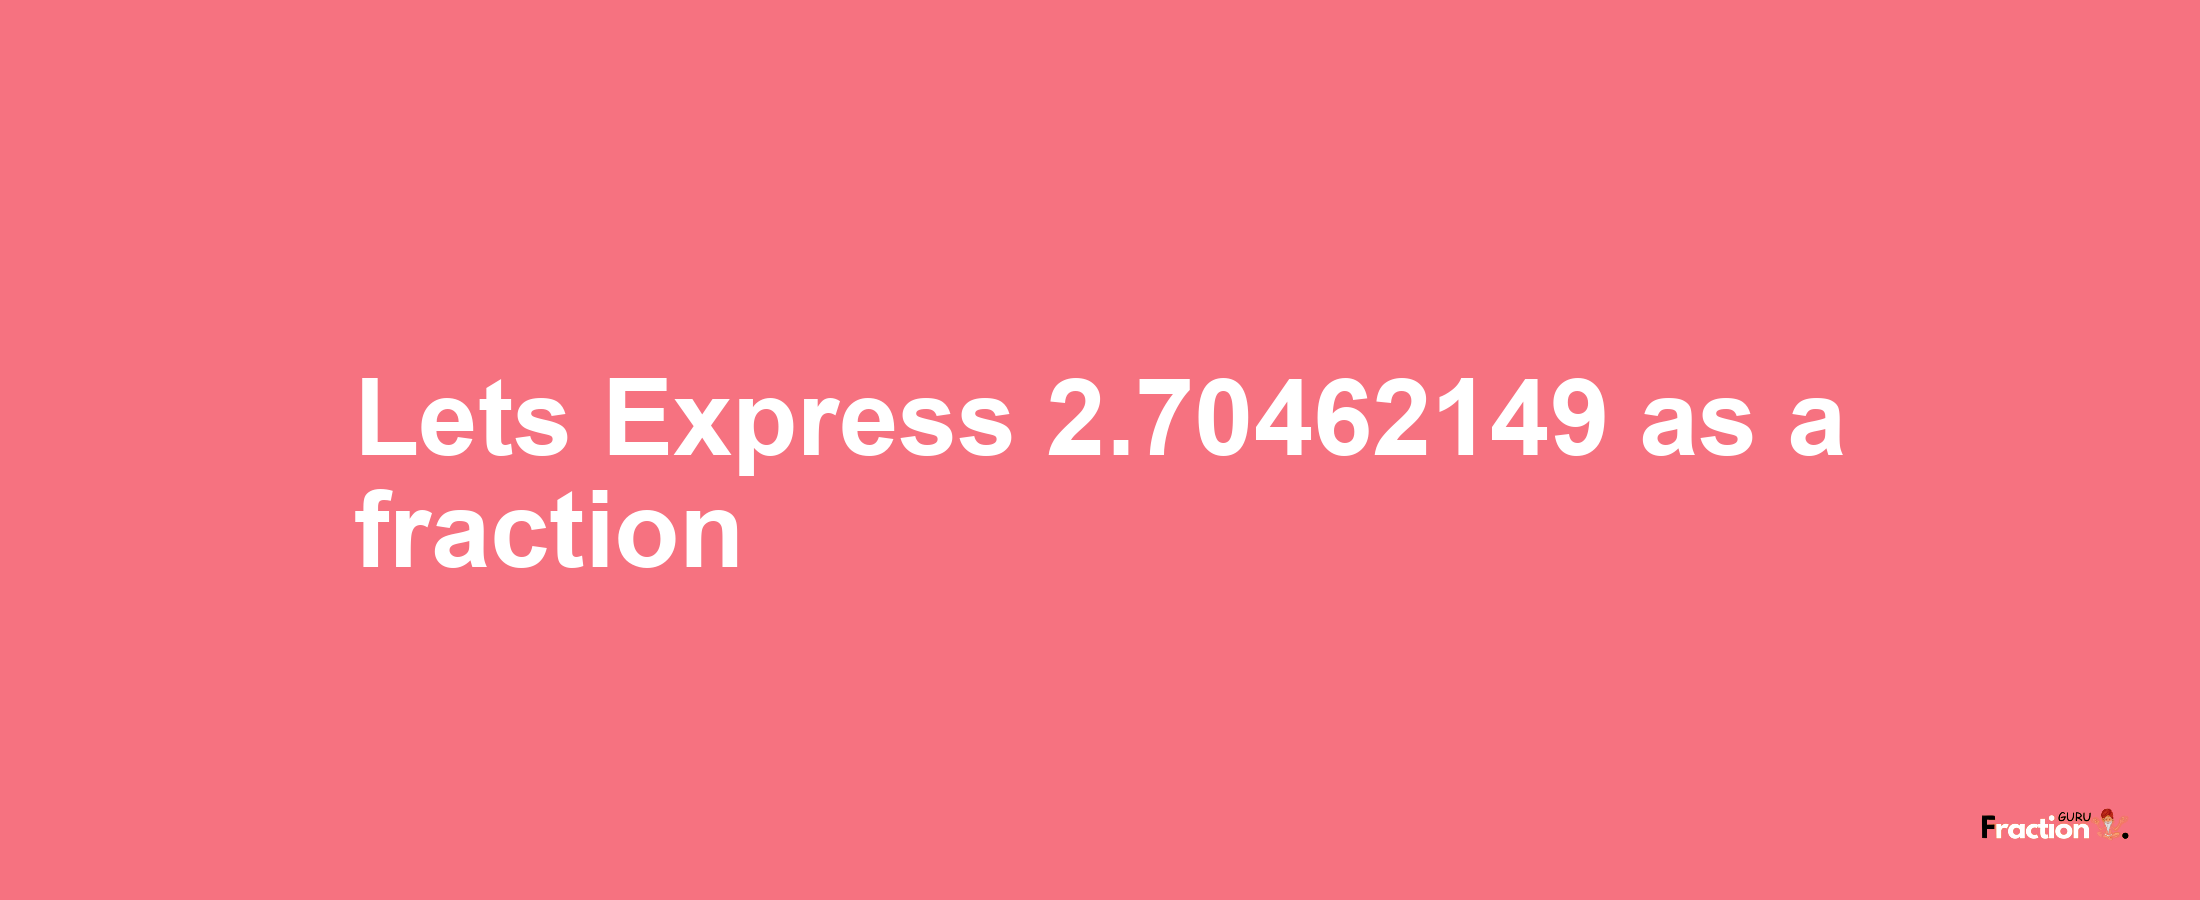 Lets Express 2.70462149 as afraction